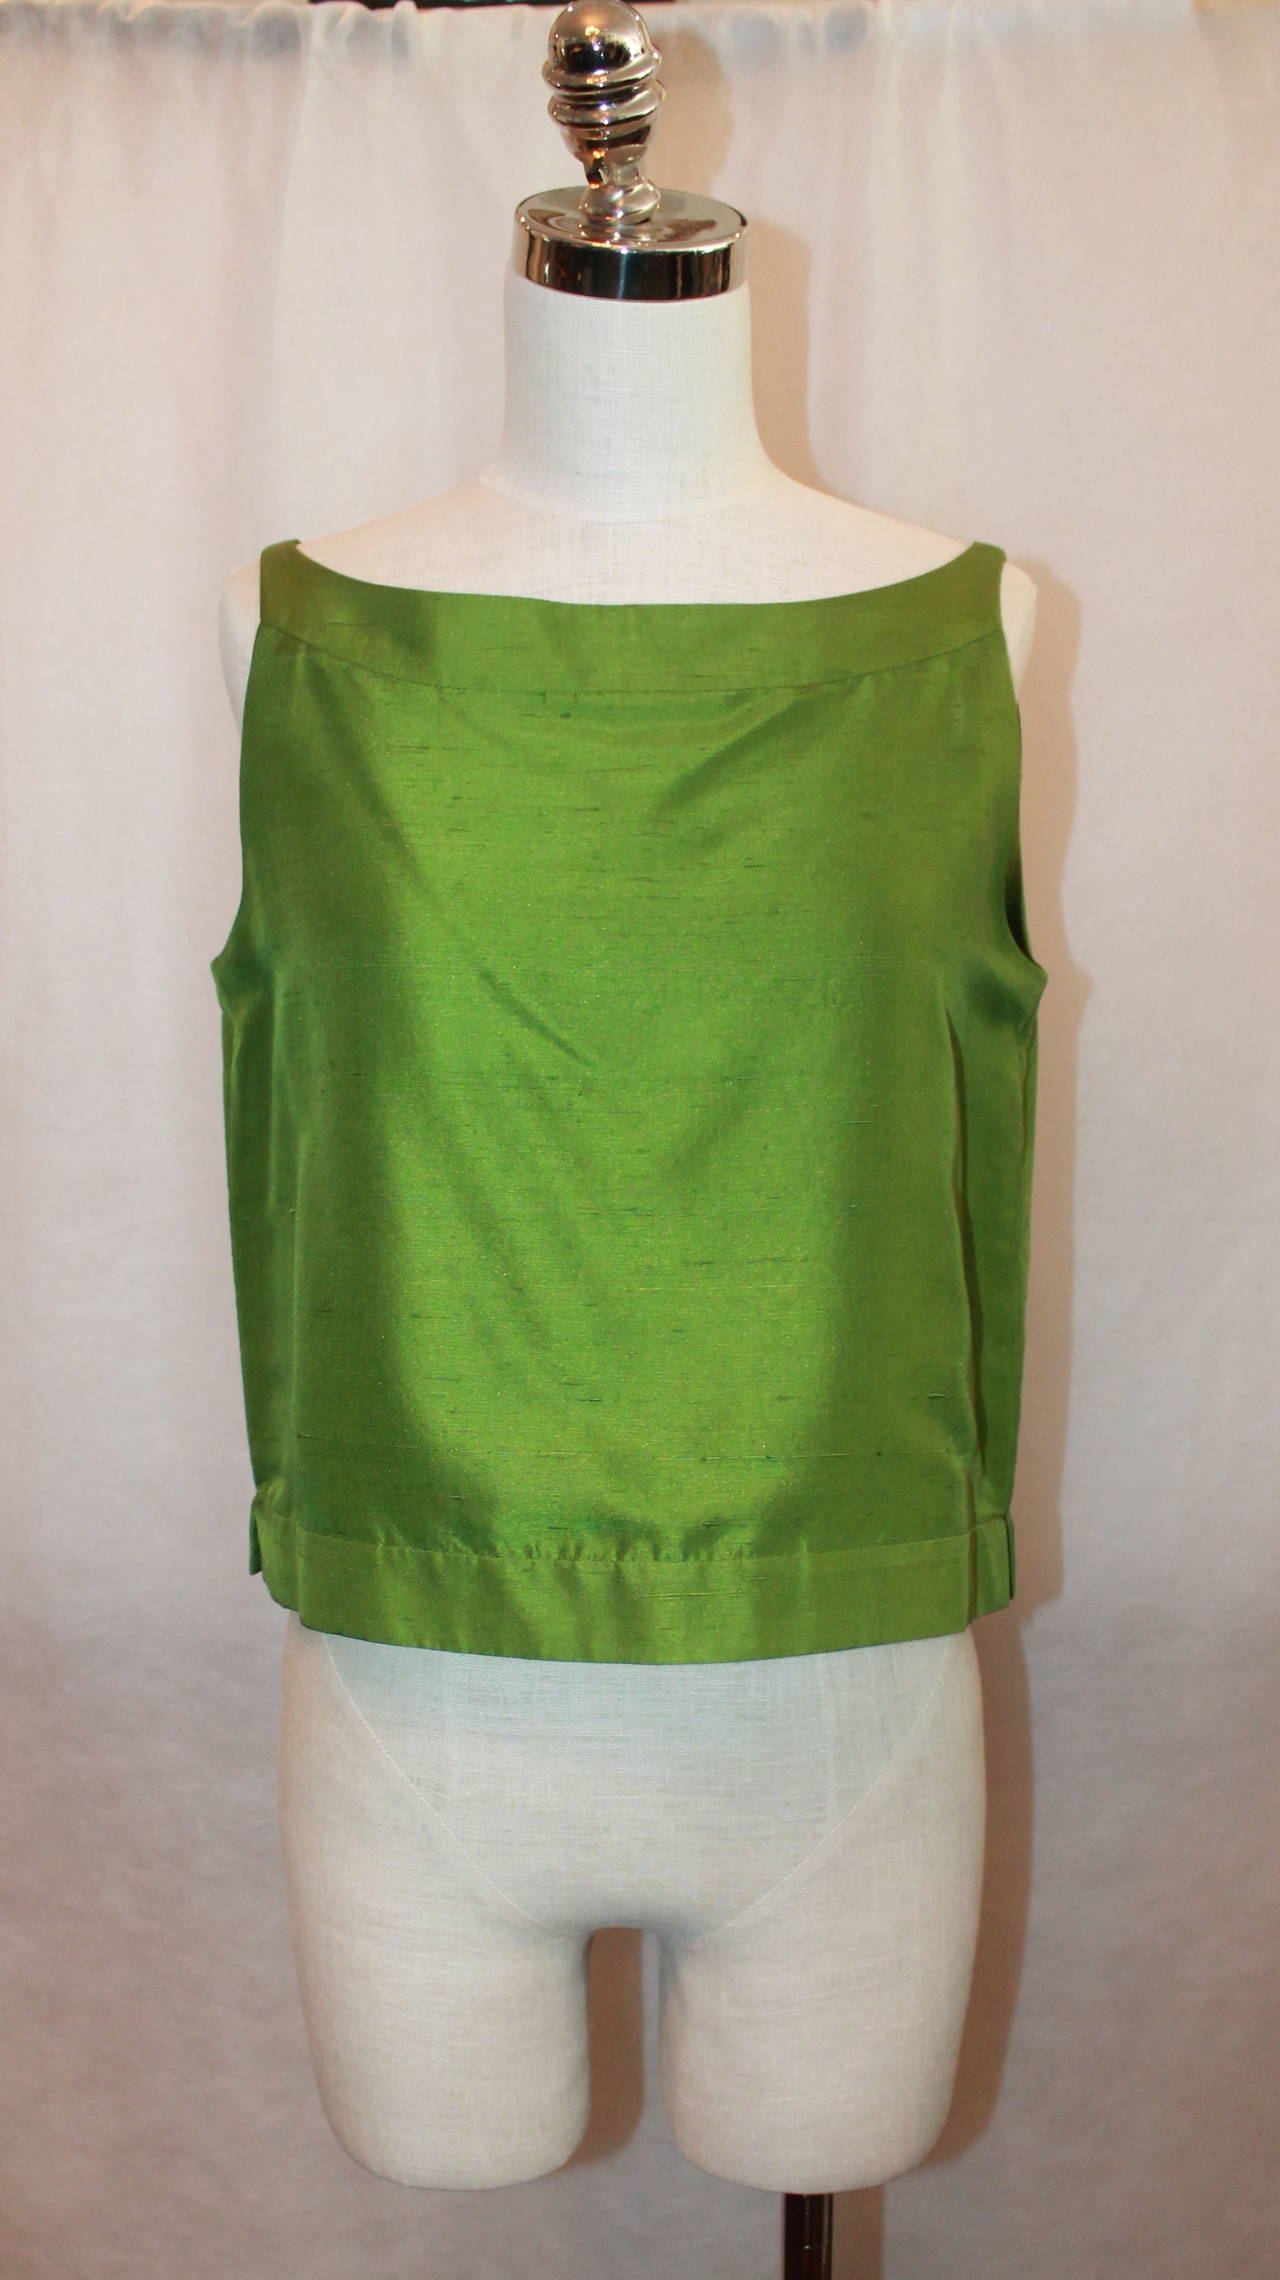 This Oscar de la Renta Green Silk Sleeveless Top is a size 8, is from the 90's and is in excellent condition. The top has a beautiful neckline and has a keyhole opening in the back with 2 silk covered buttons. It is not a crop top but is somewhat